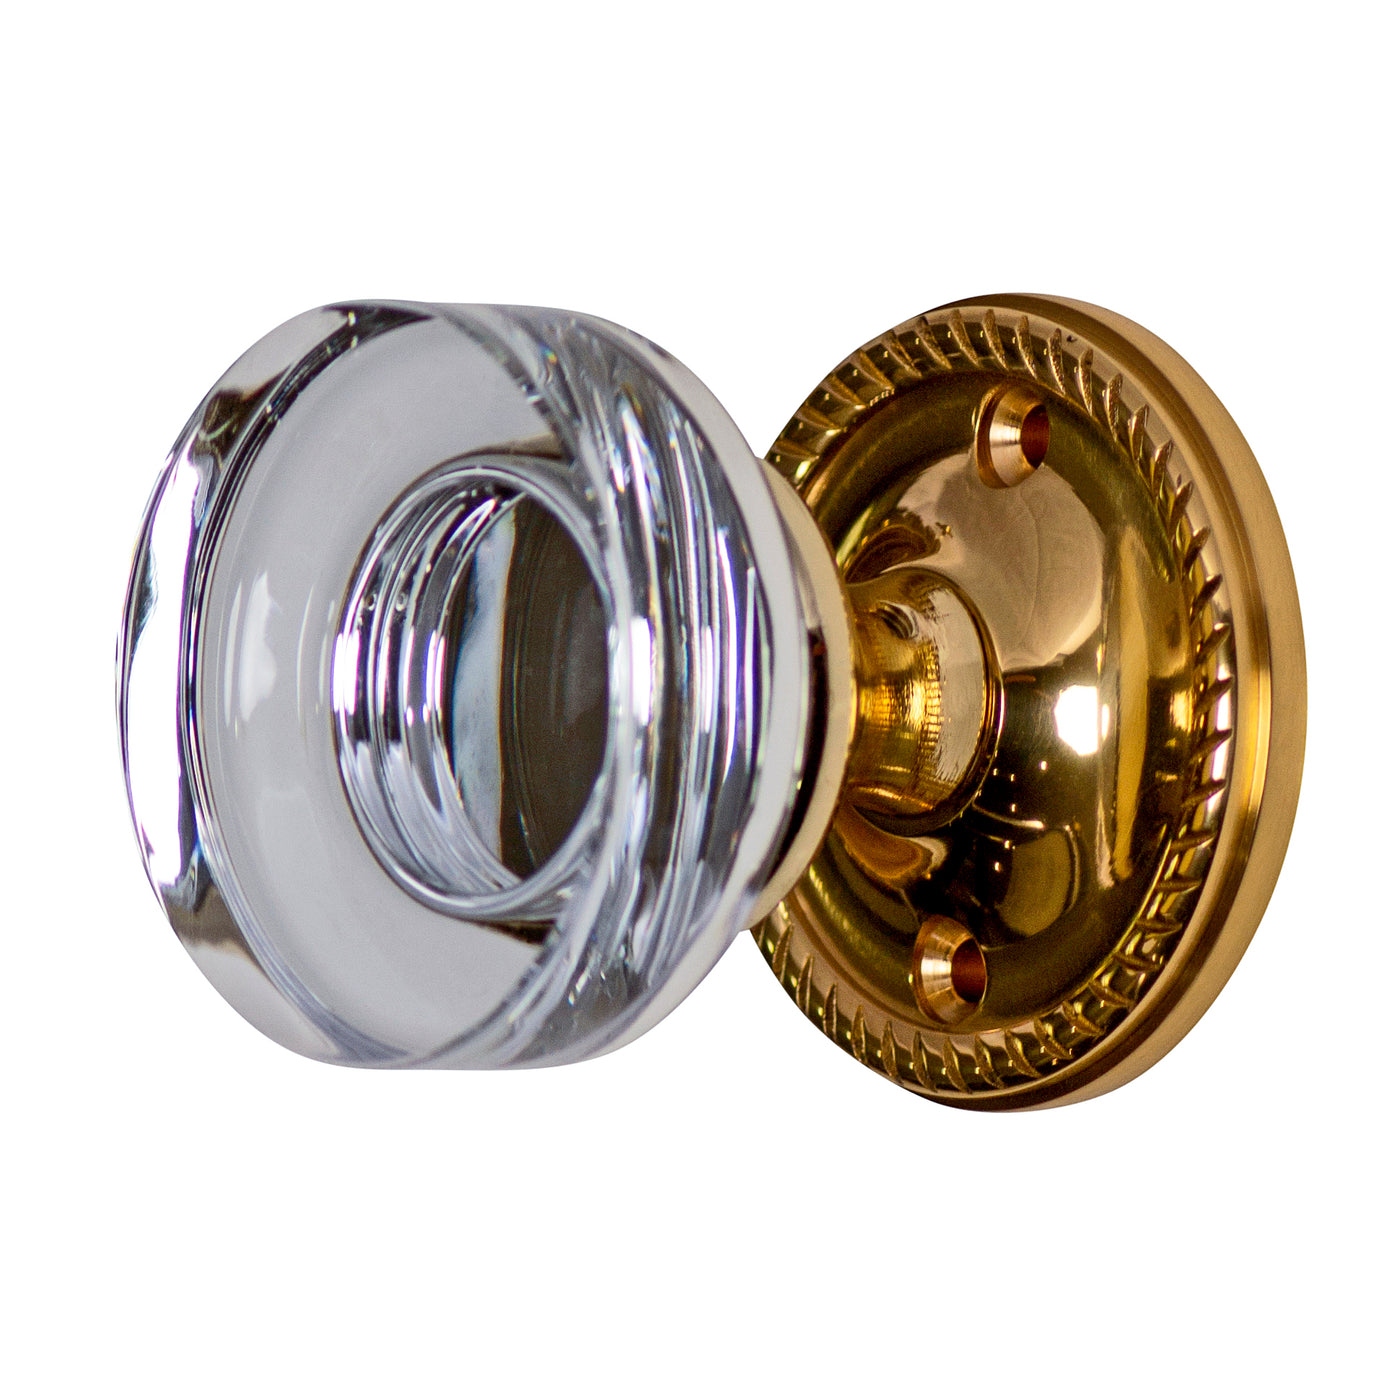 Double Sided Crystal Disc Door Knob Set with Georgian Roped Rosette